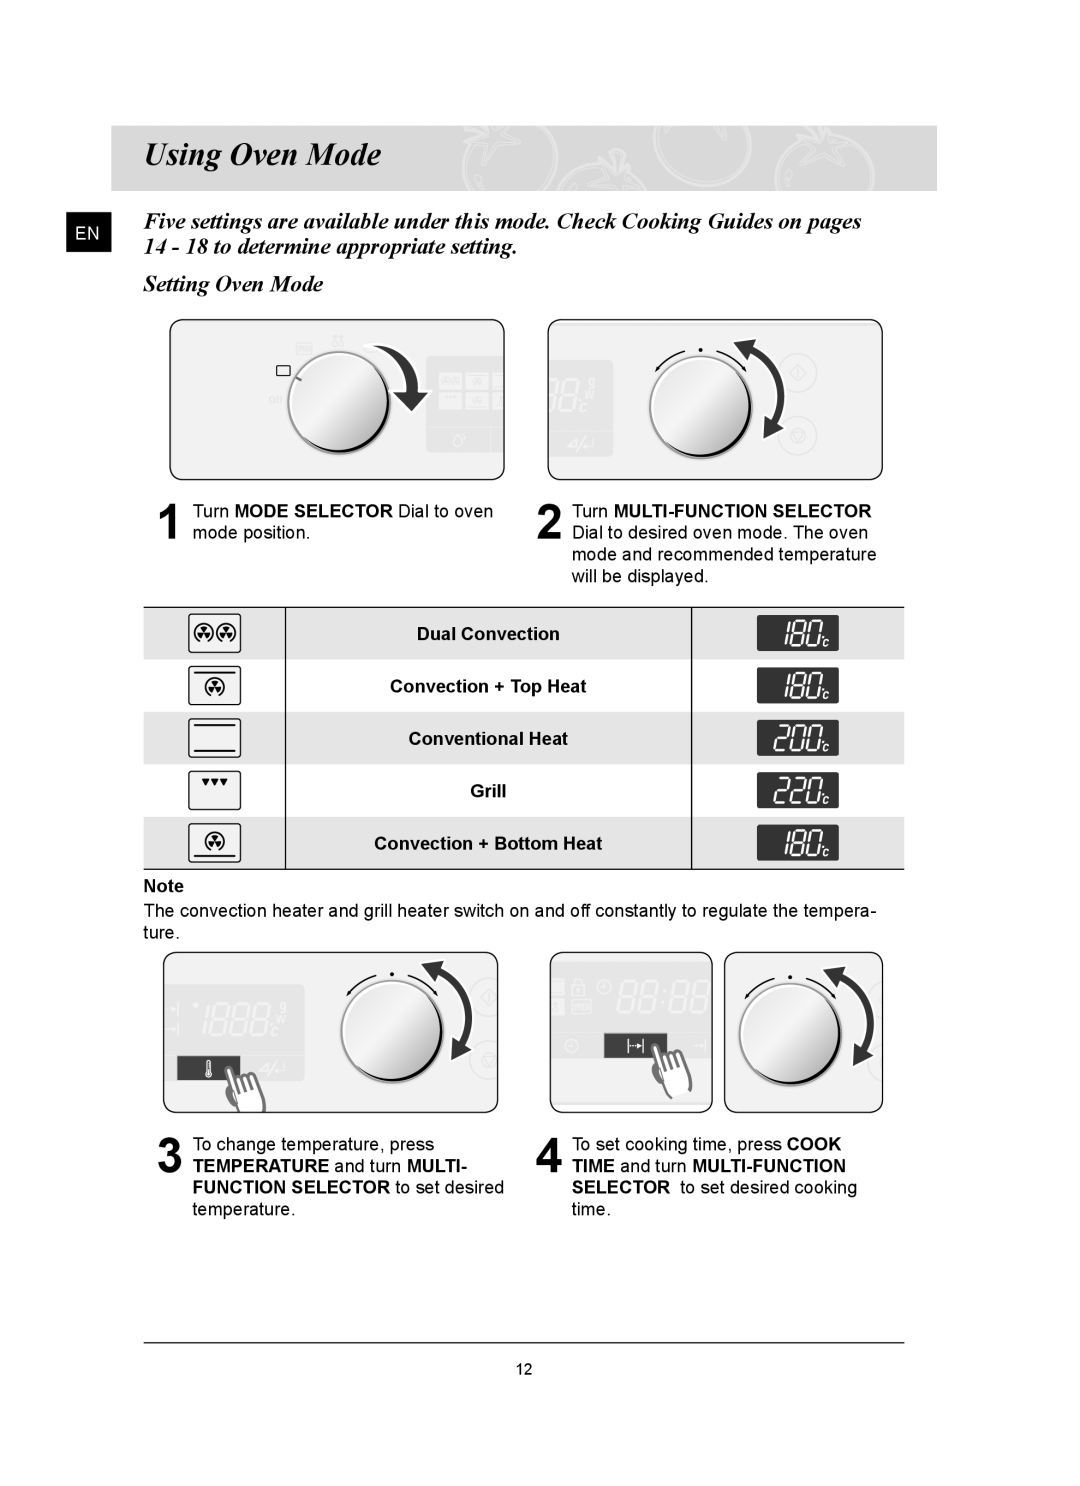 Samsung FQ159UST Using Oven Mode, 14 - 18 to determine appropriate setting, Setting Oven Mode, Convection + Bottom Heat 